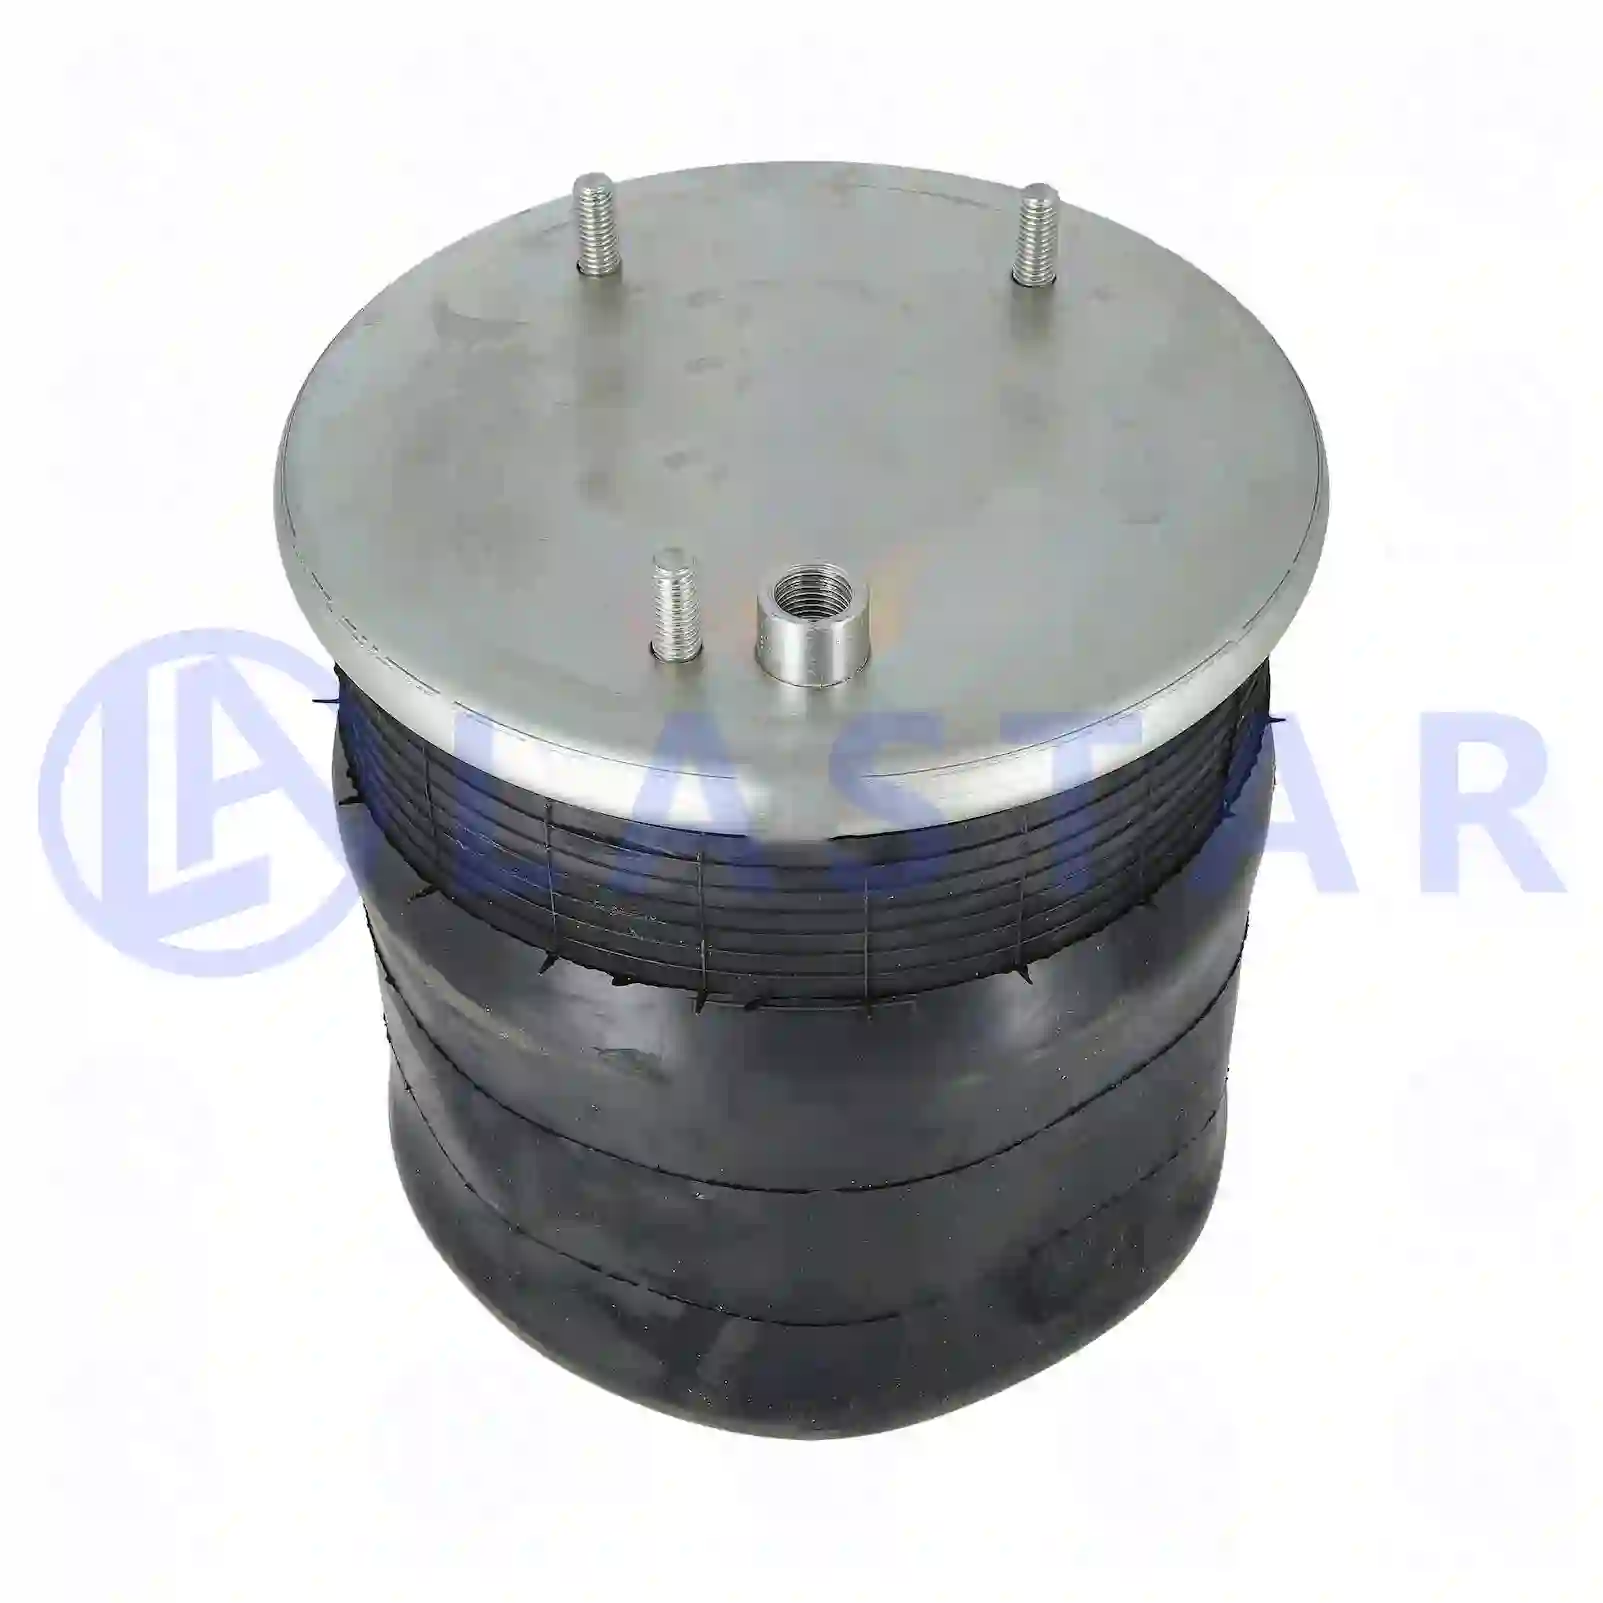 Air spring, with steel piston, 77727220, 1266382, 1697682, ZG40783-0008 ||  77727220 Lastar Spare Part | Truck Spare Parts, Auotomotive Spare Parts Air spring, with steel piston, 77727220, 1266382, 1697682, ZG40783-0008 ||  77727220 Lastar Spare Part | Truck Spare Parts, Auotomotive Spare Parts